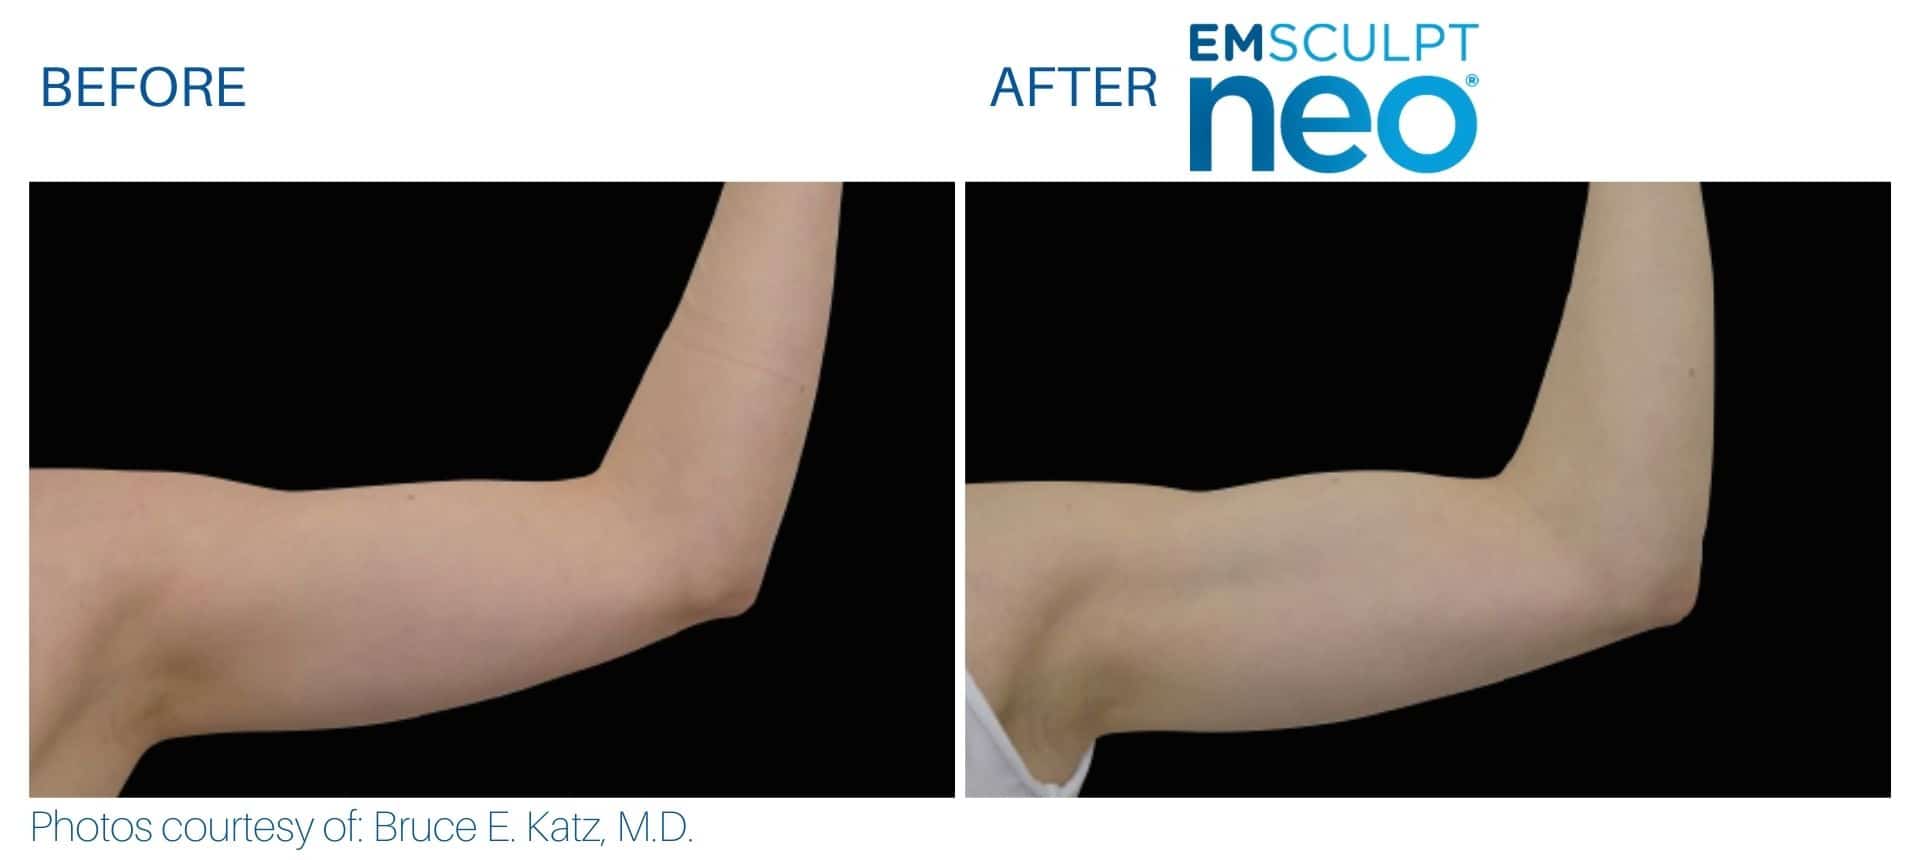 Emsculpt neo arm fat treatment before and after